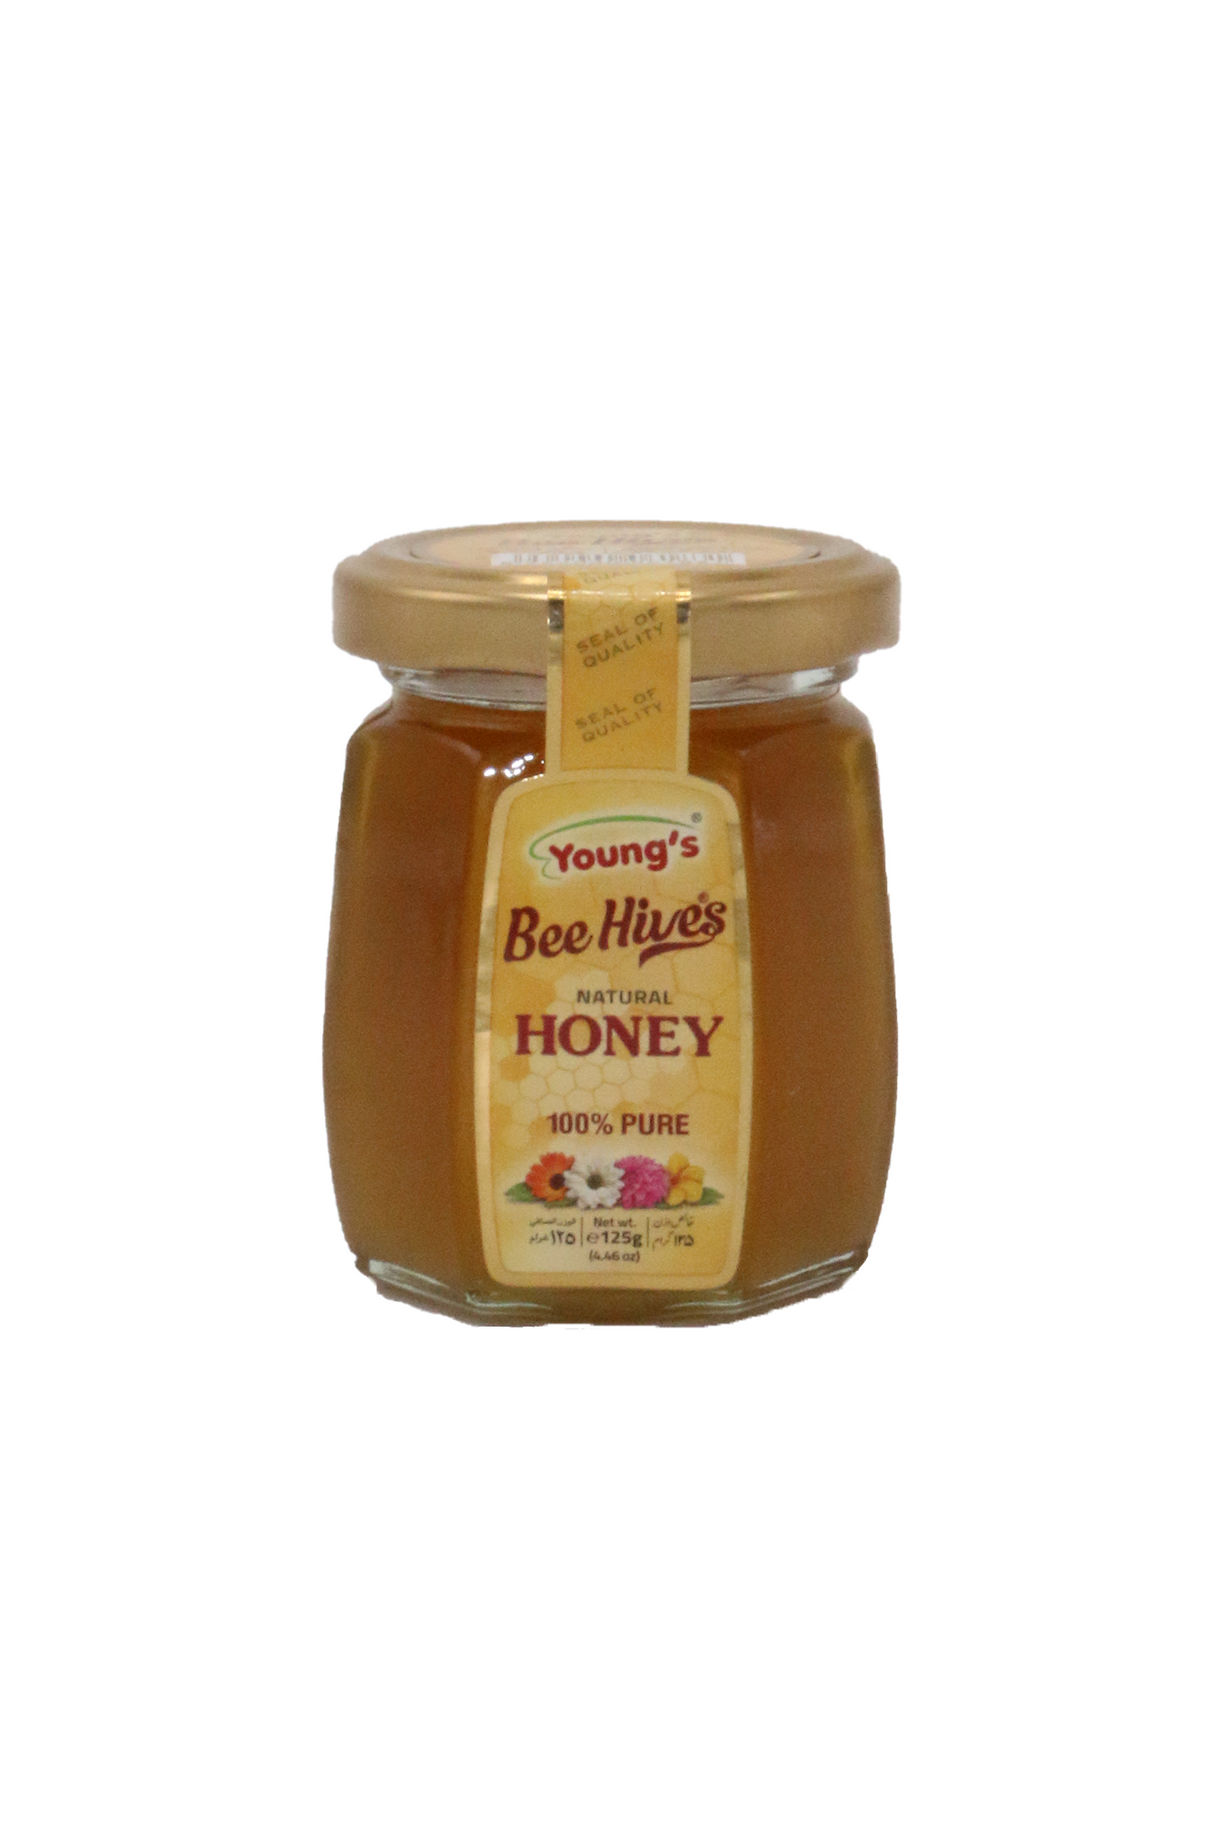 youngs bee hives natural honey bottle 125g